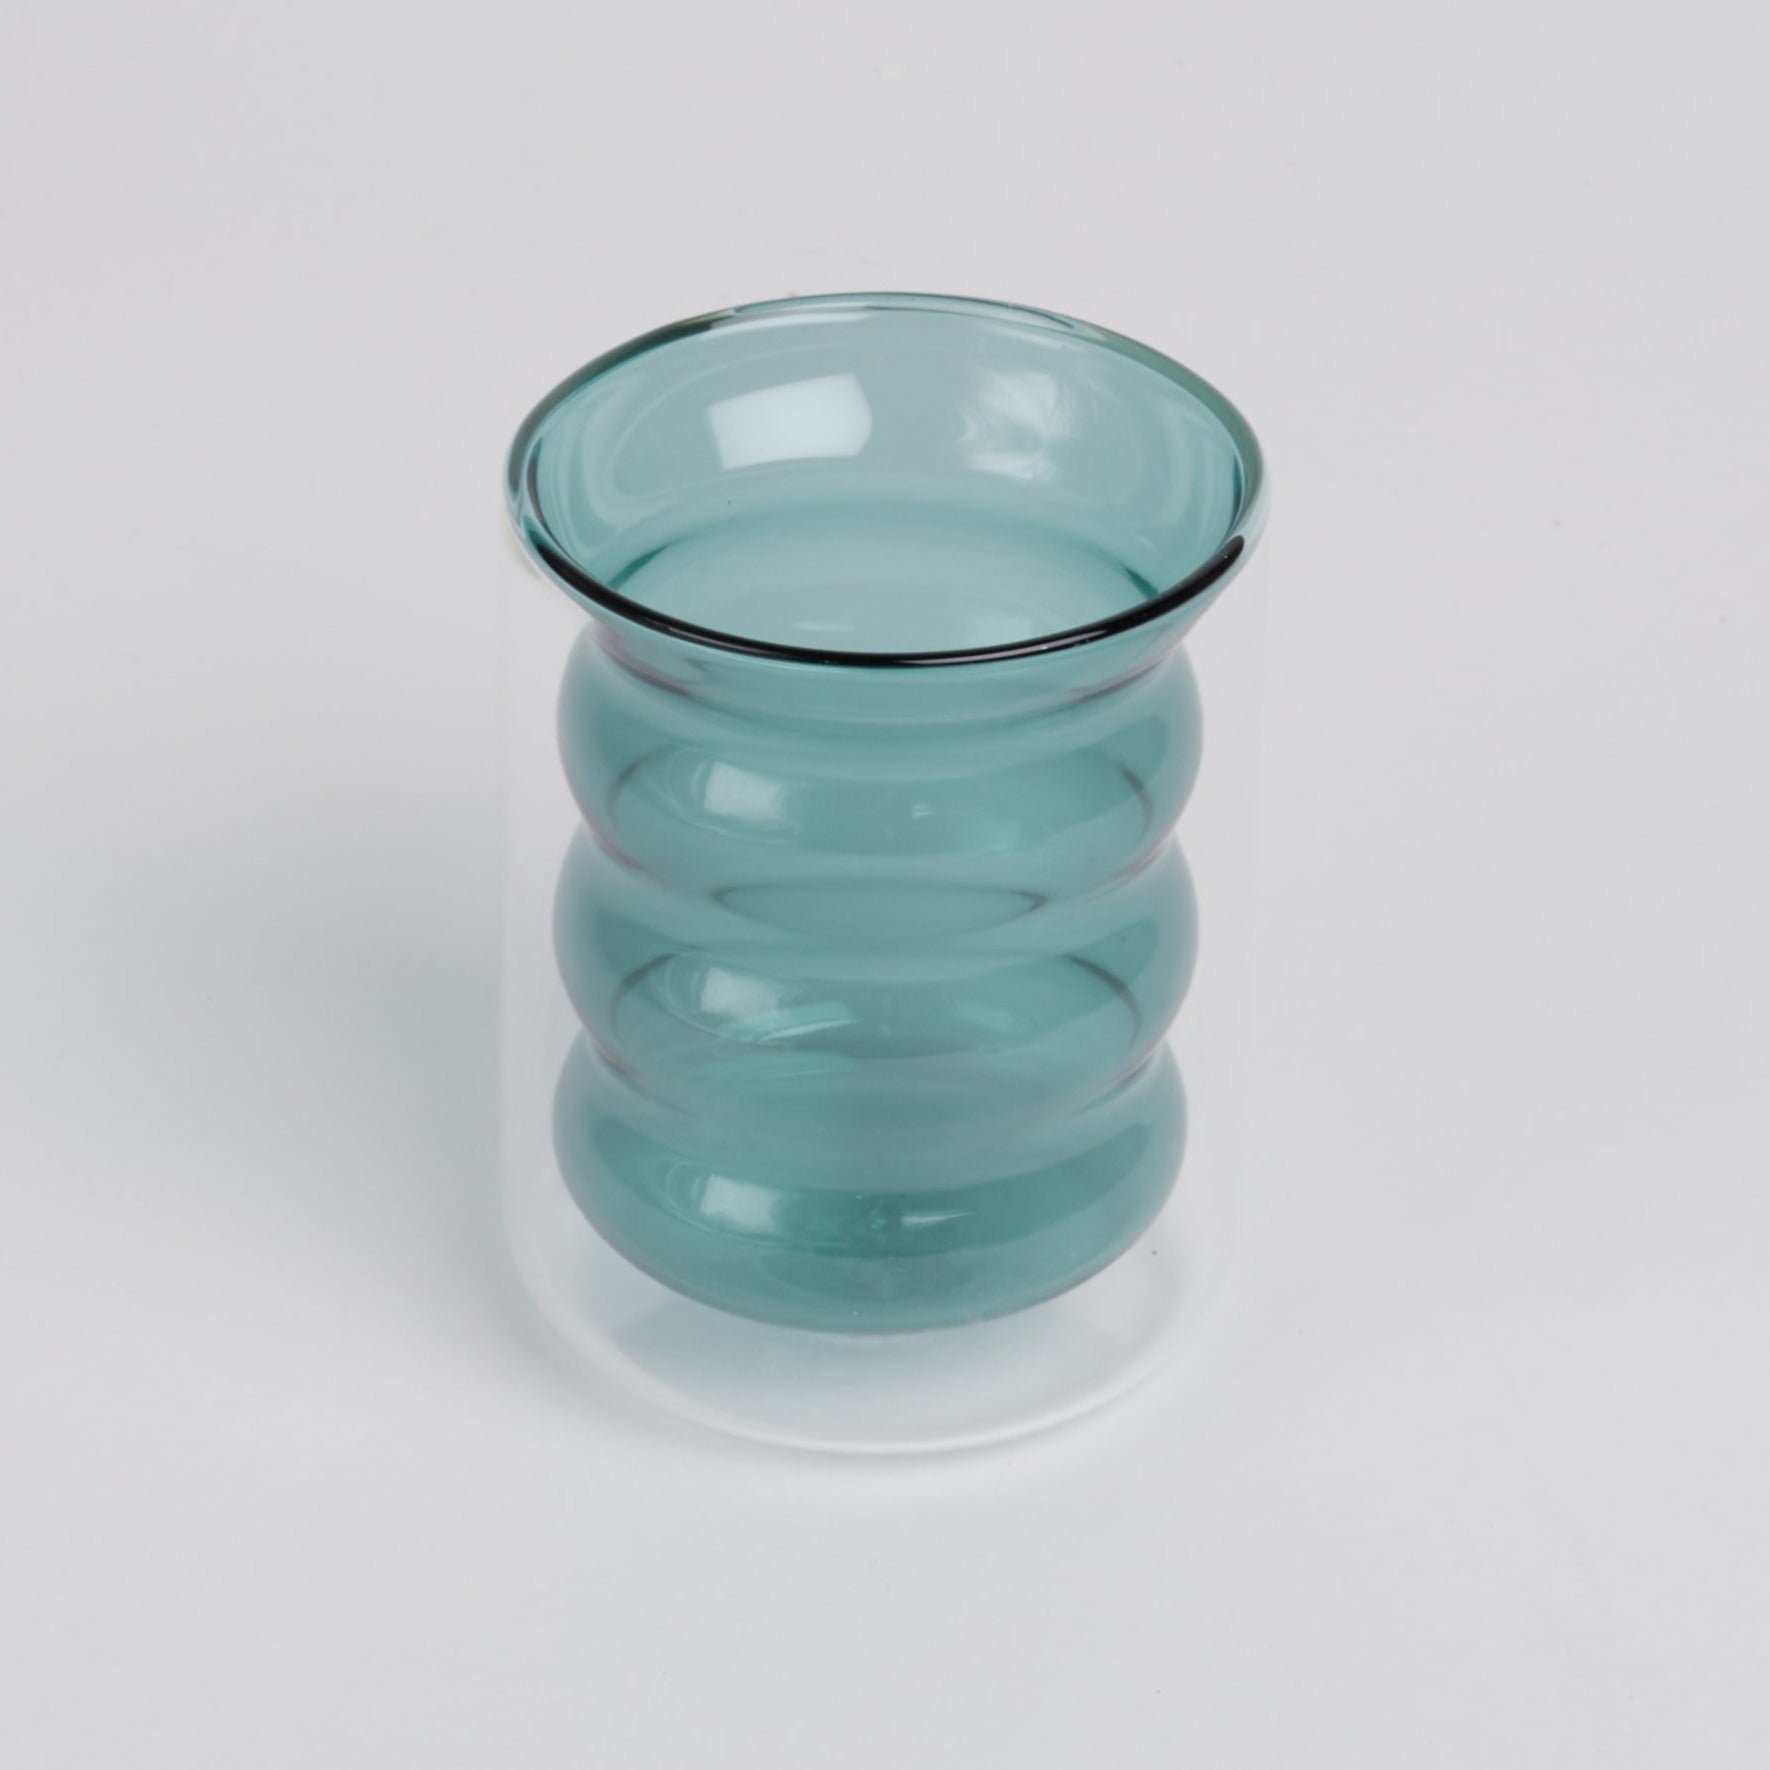 A teal ripple glass on a white background.